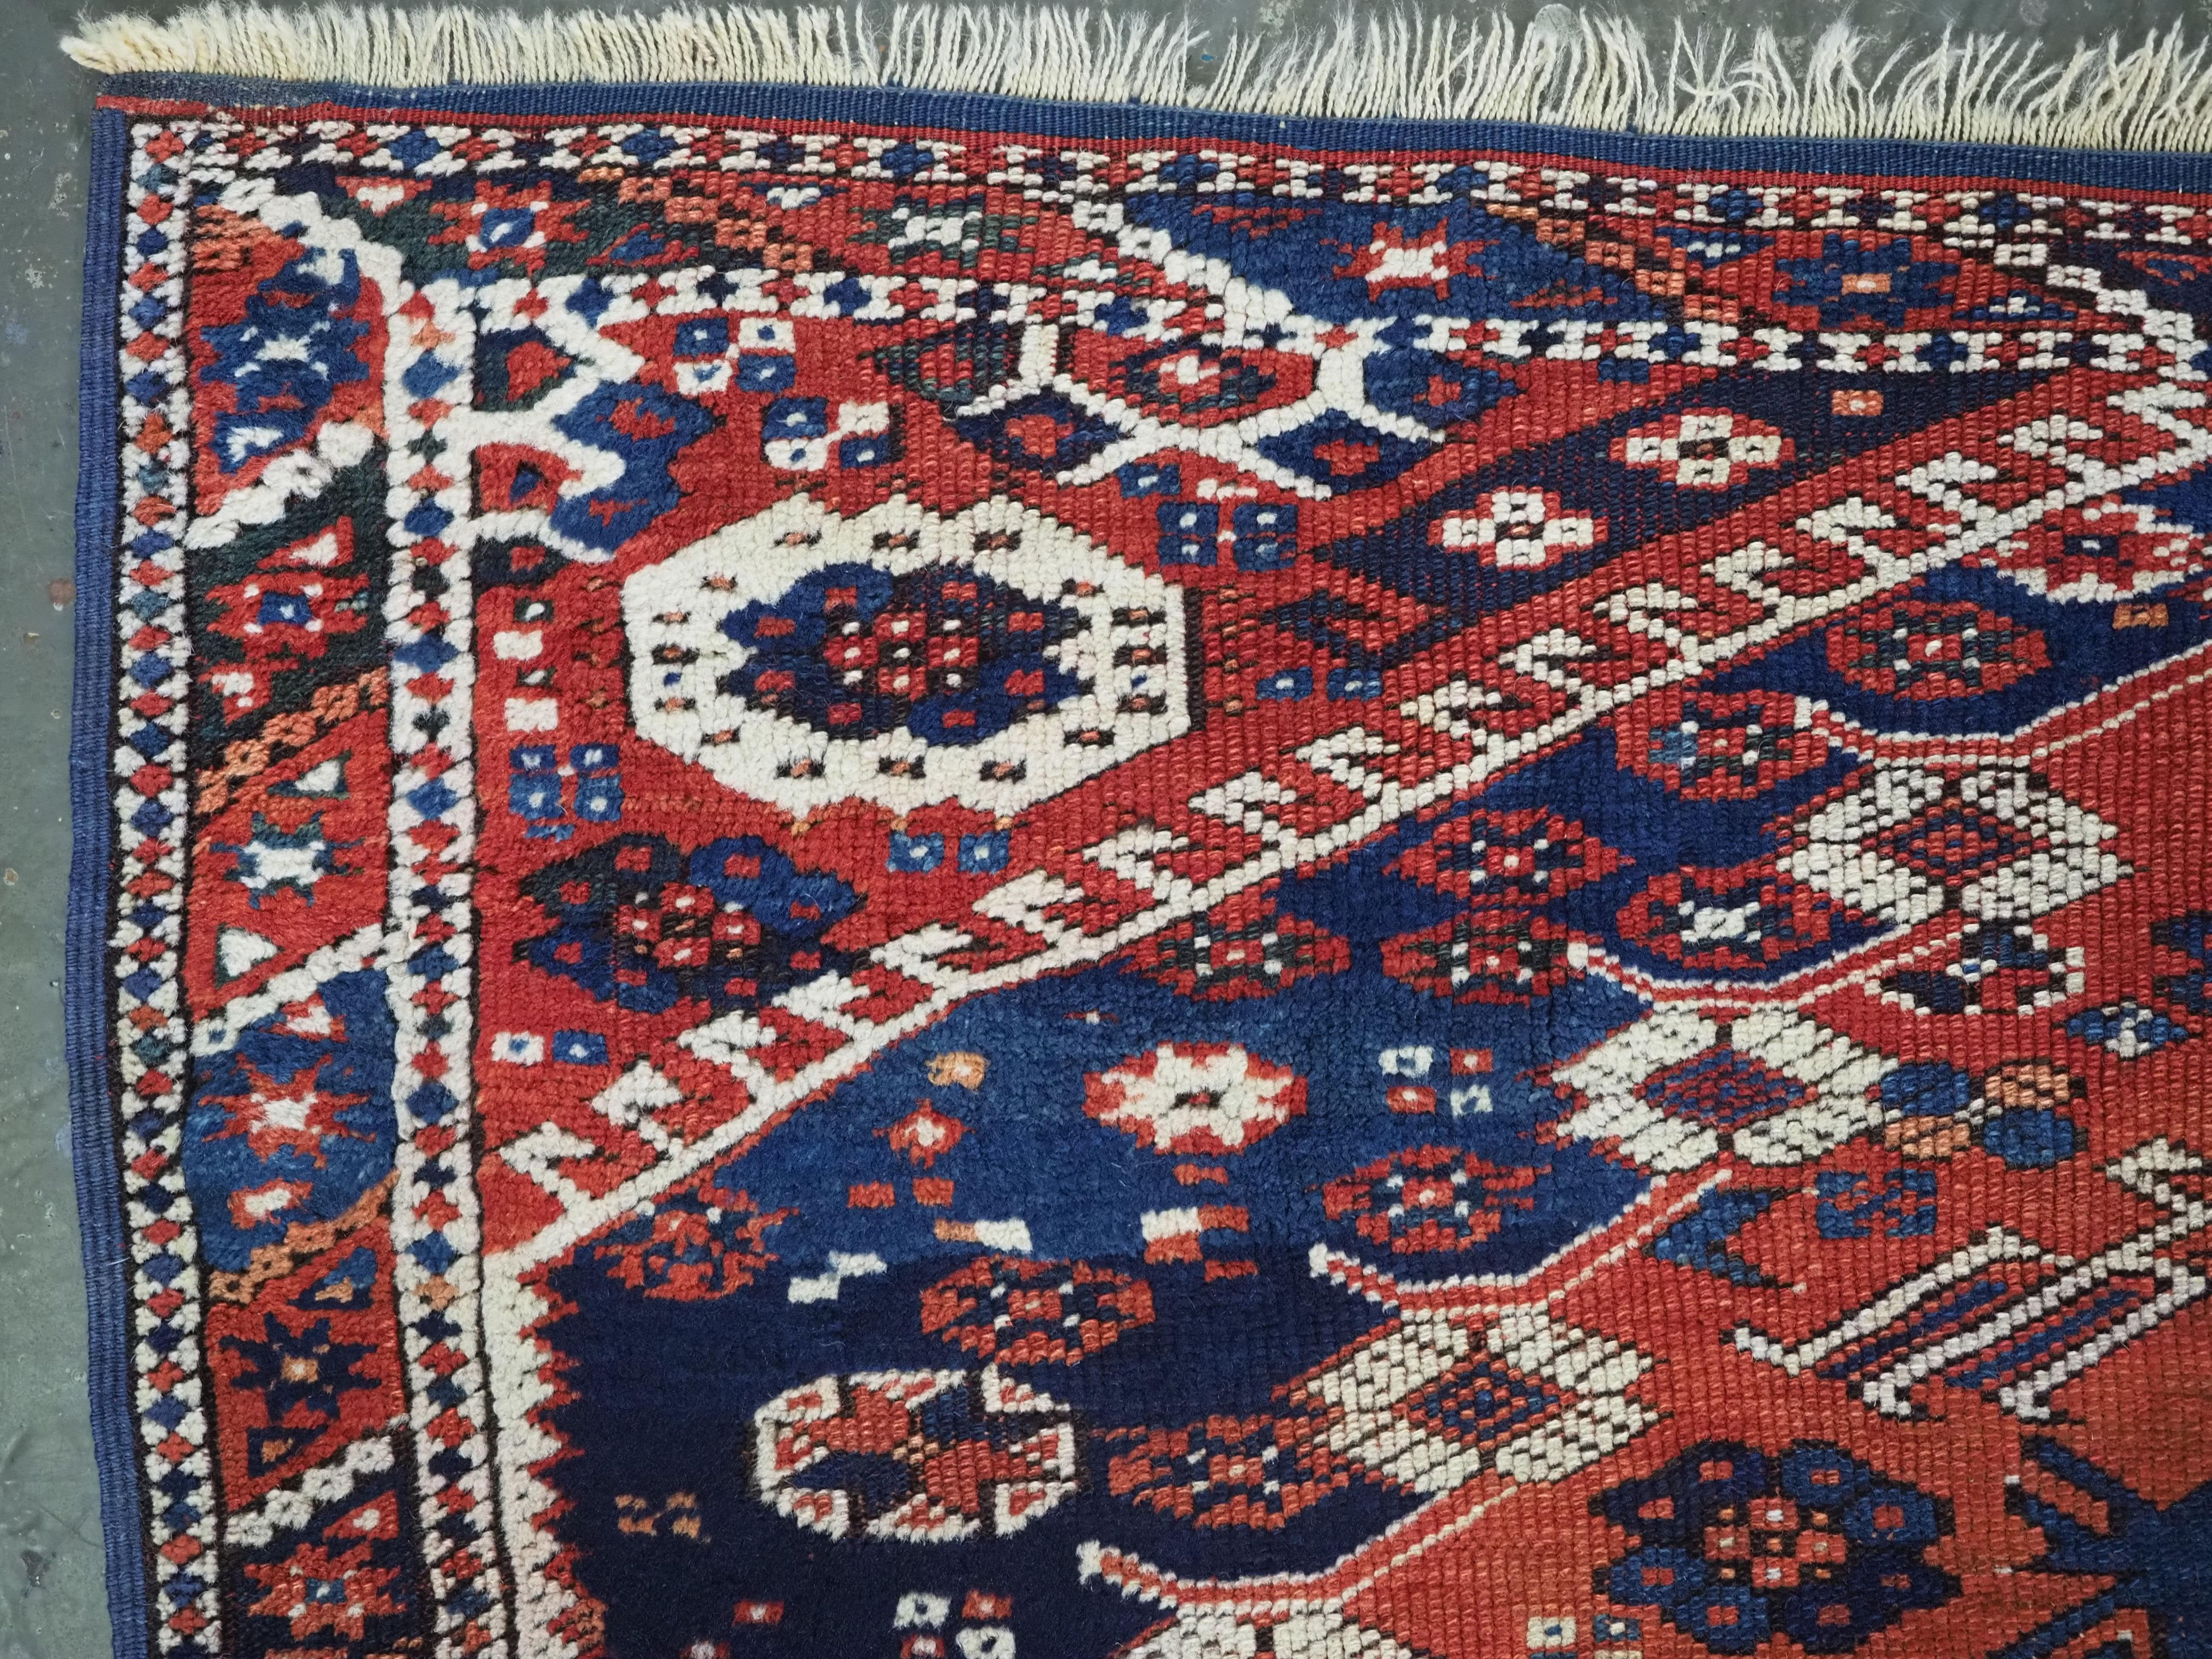 Size: 3ft 1in x 3ft 7in (95 x 108cm).

Antique Turkish Kiz Bergama rug of classic design with superb colour.

Circa 1850/70.

The rug is of a traditional design associated with these small rugs, they are considered to be 'dowry' weavings. This